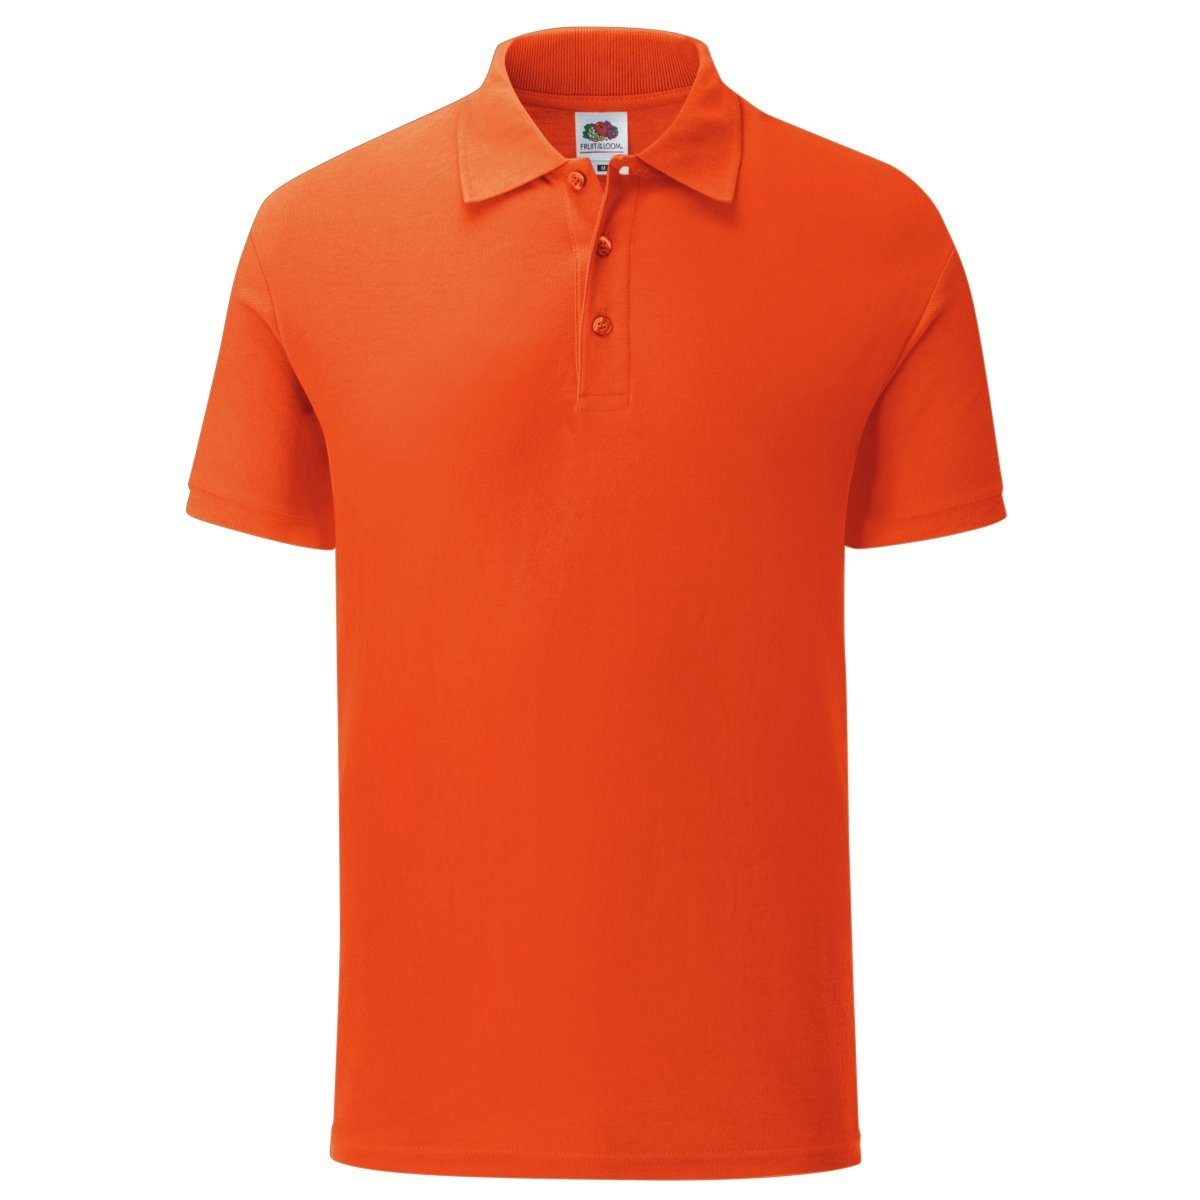 Polo of Loom of the Iconic Fruit the feuerrot Fruit Poloshirt Loom